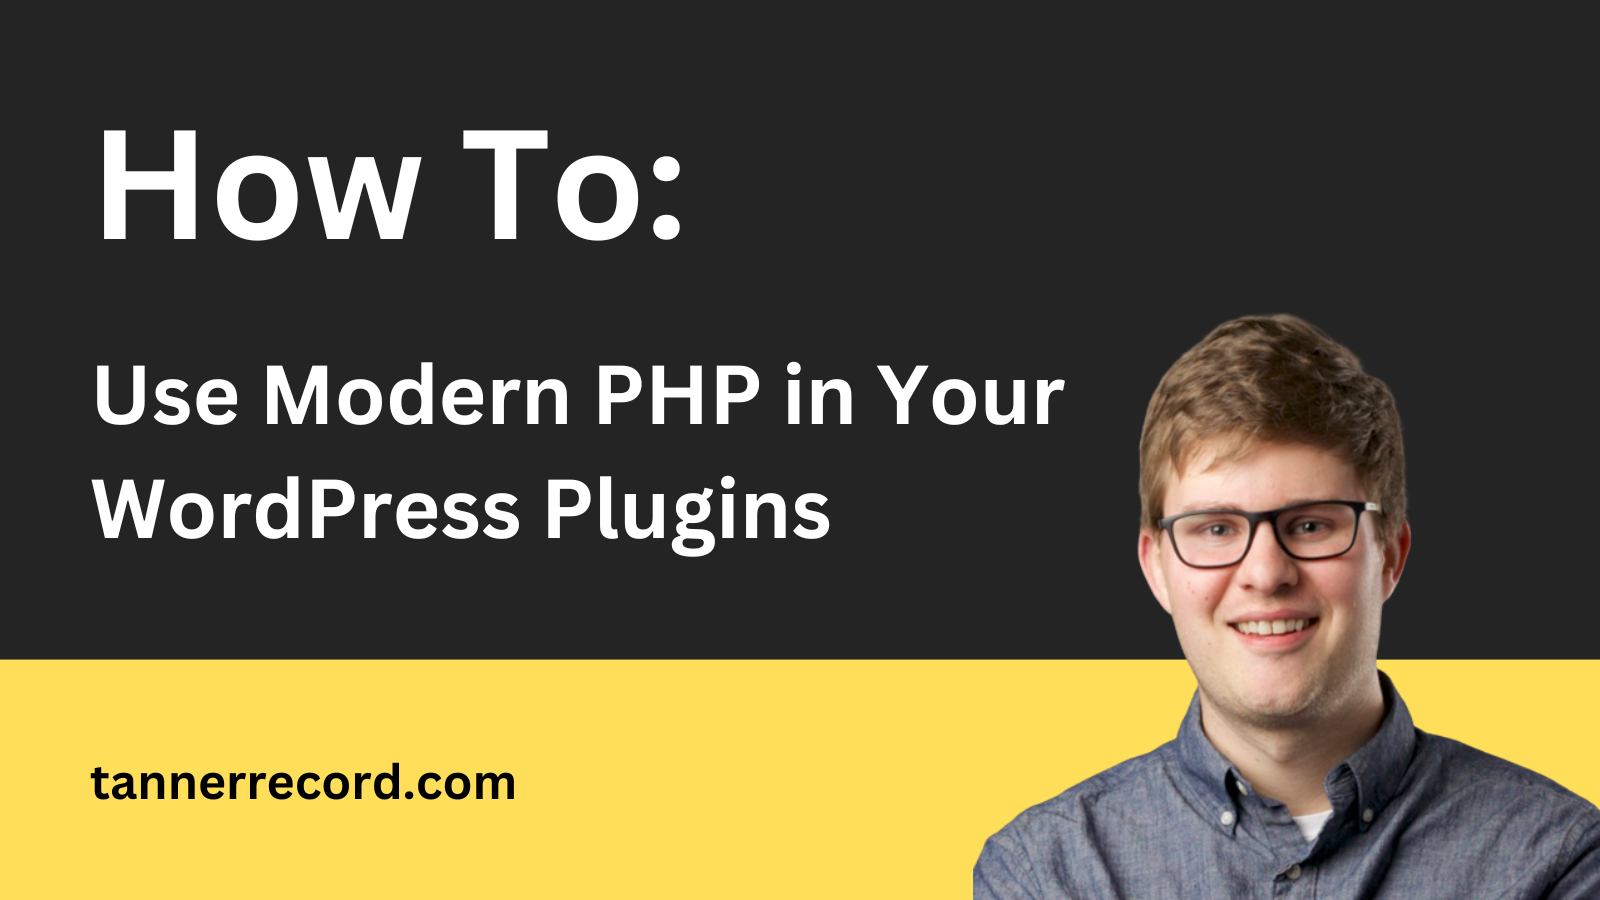 SWPD #006: Use Modern PHP in Your WordPress Plugins